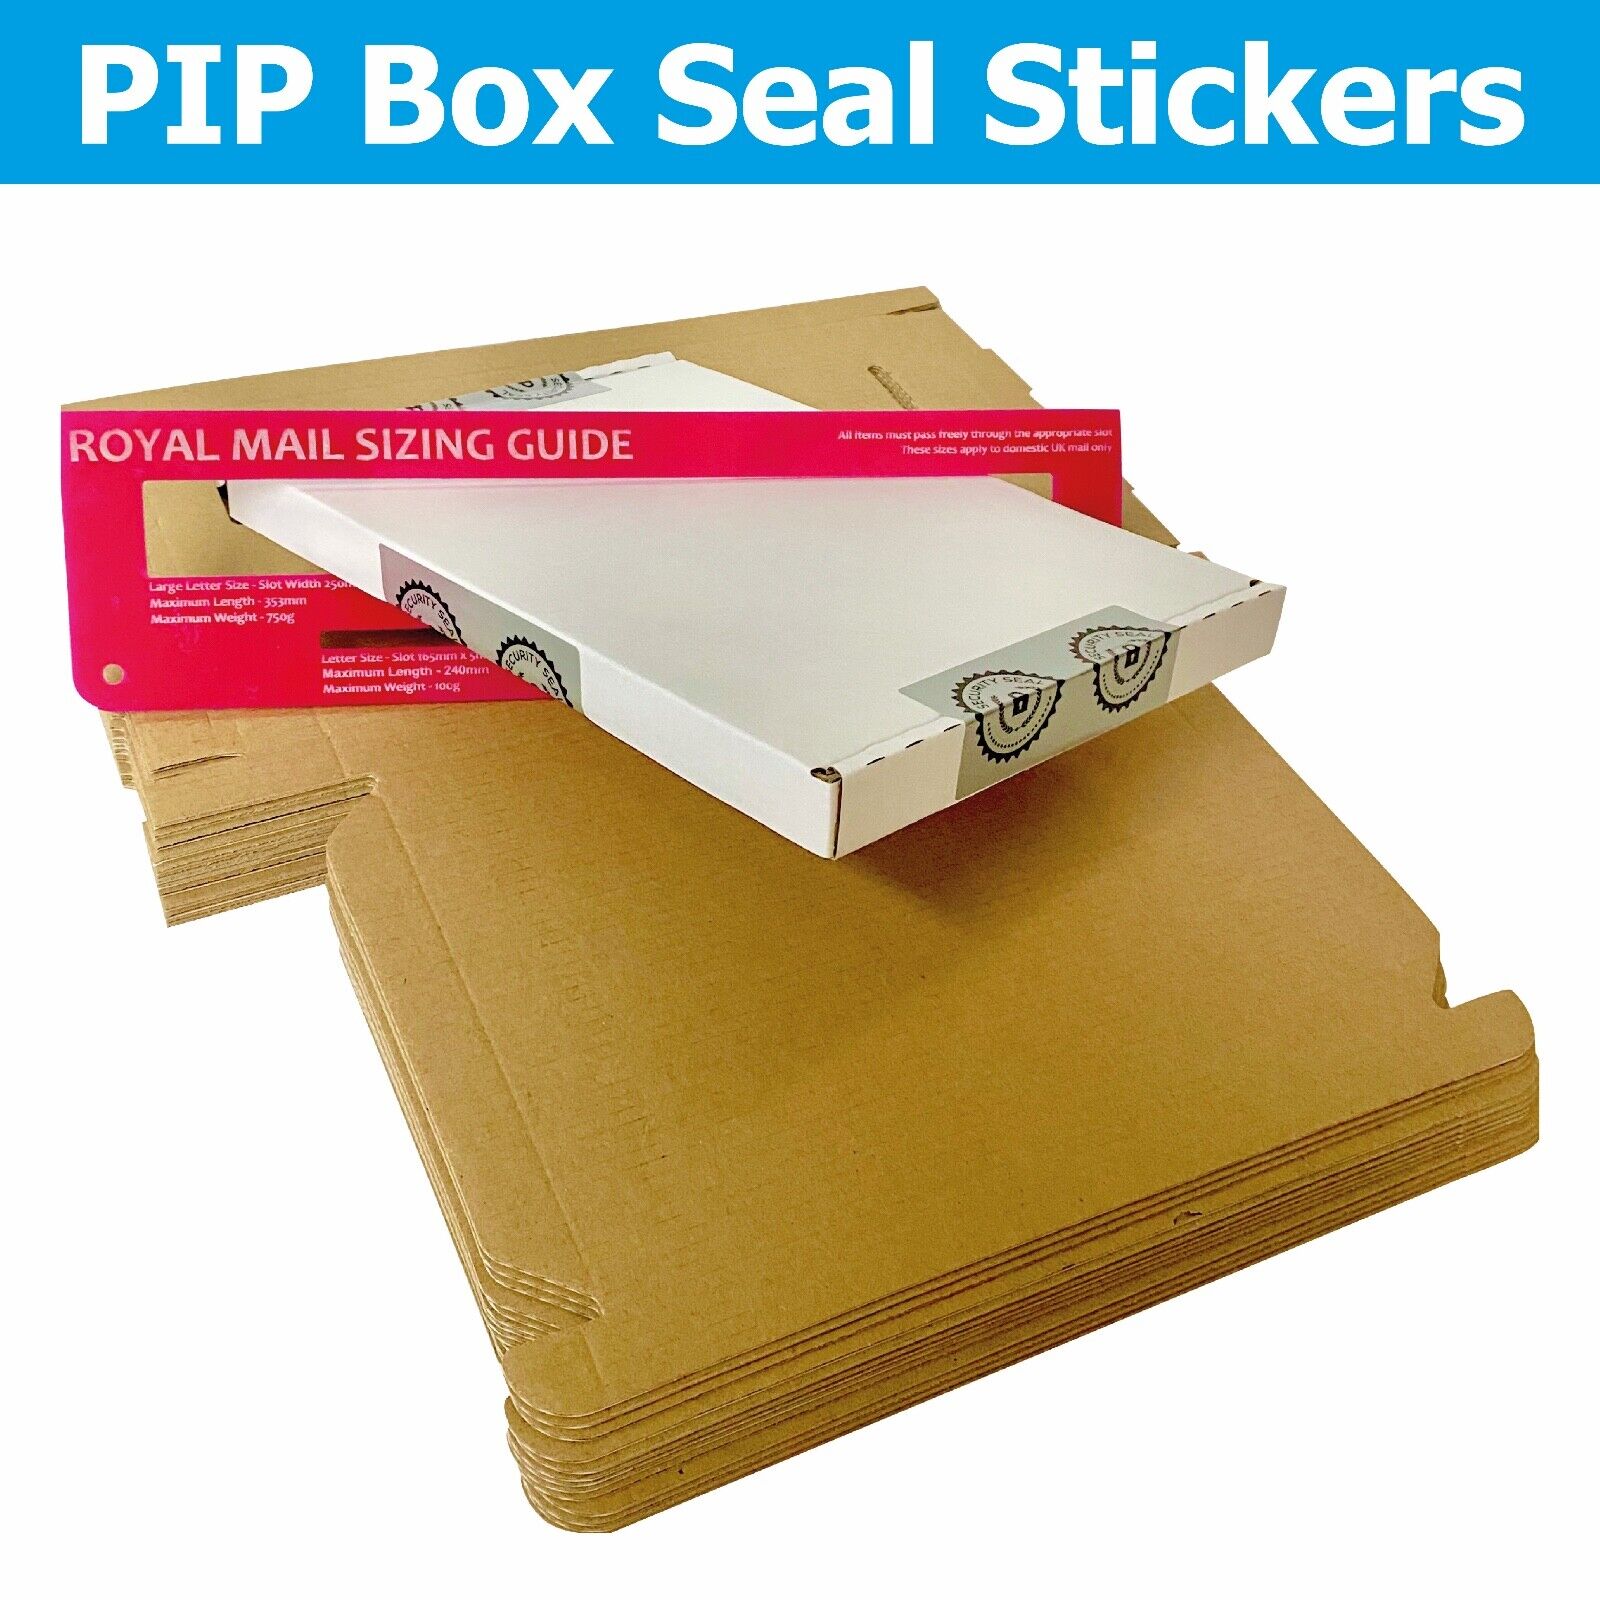 PIP Box / Packet / BOX Security Seals Ideal For all kinds of packaging Standardowy magazyn